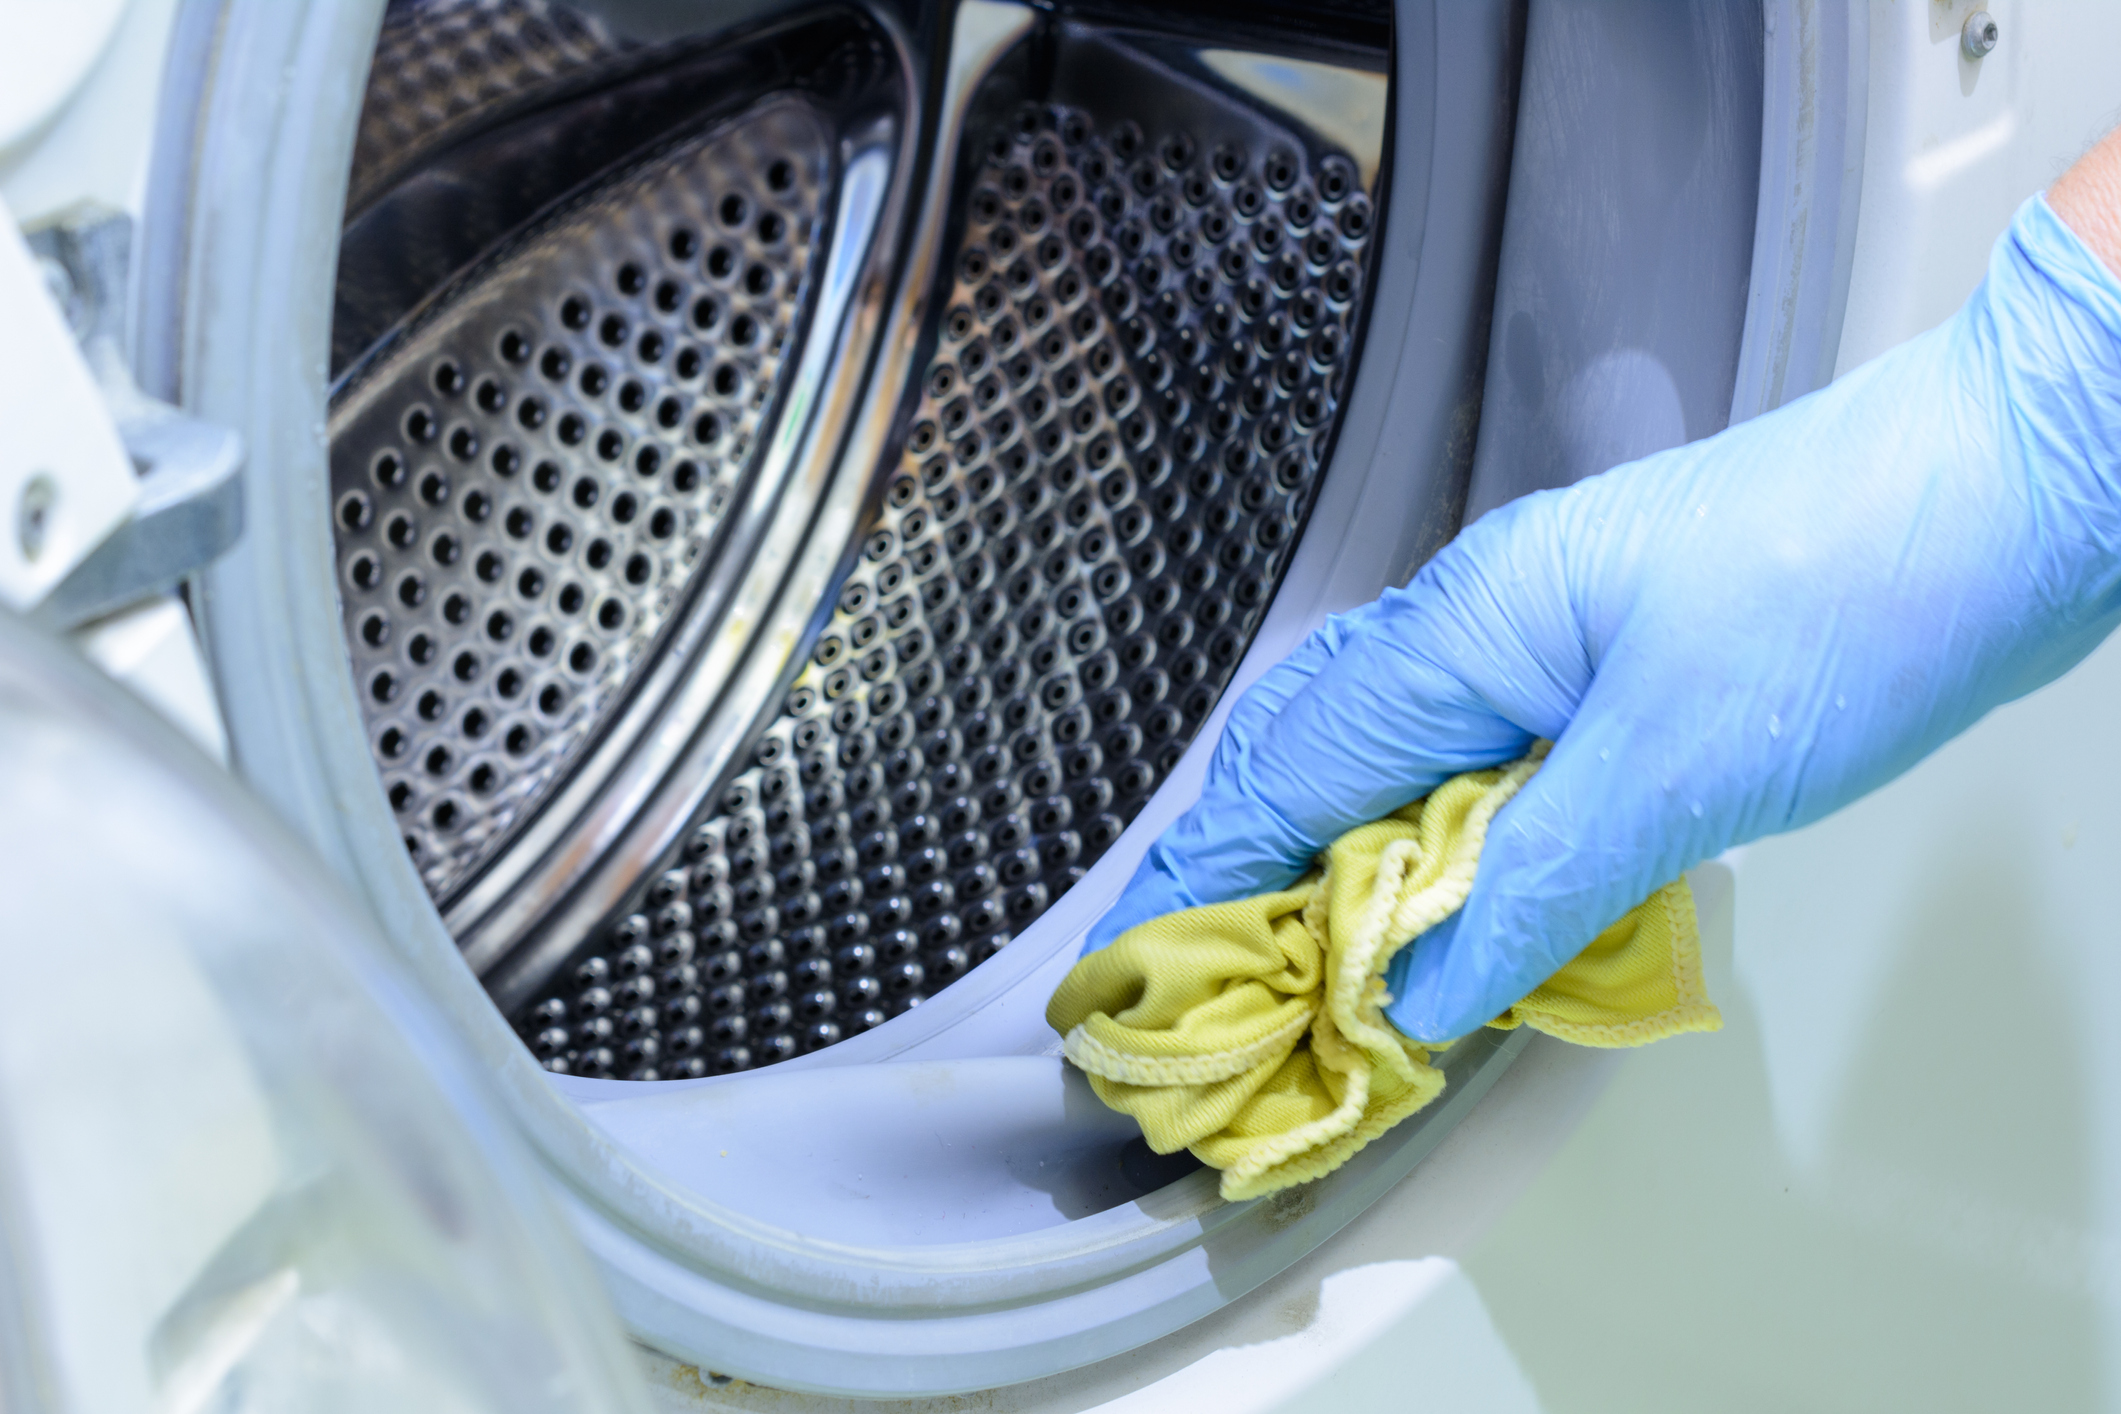 Healthcare Laundry Guidelines Wiping Down and Disinfecting Laundry Washing Machine with Rag and Rubber Gloves